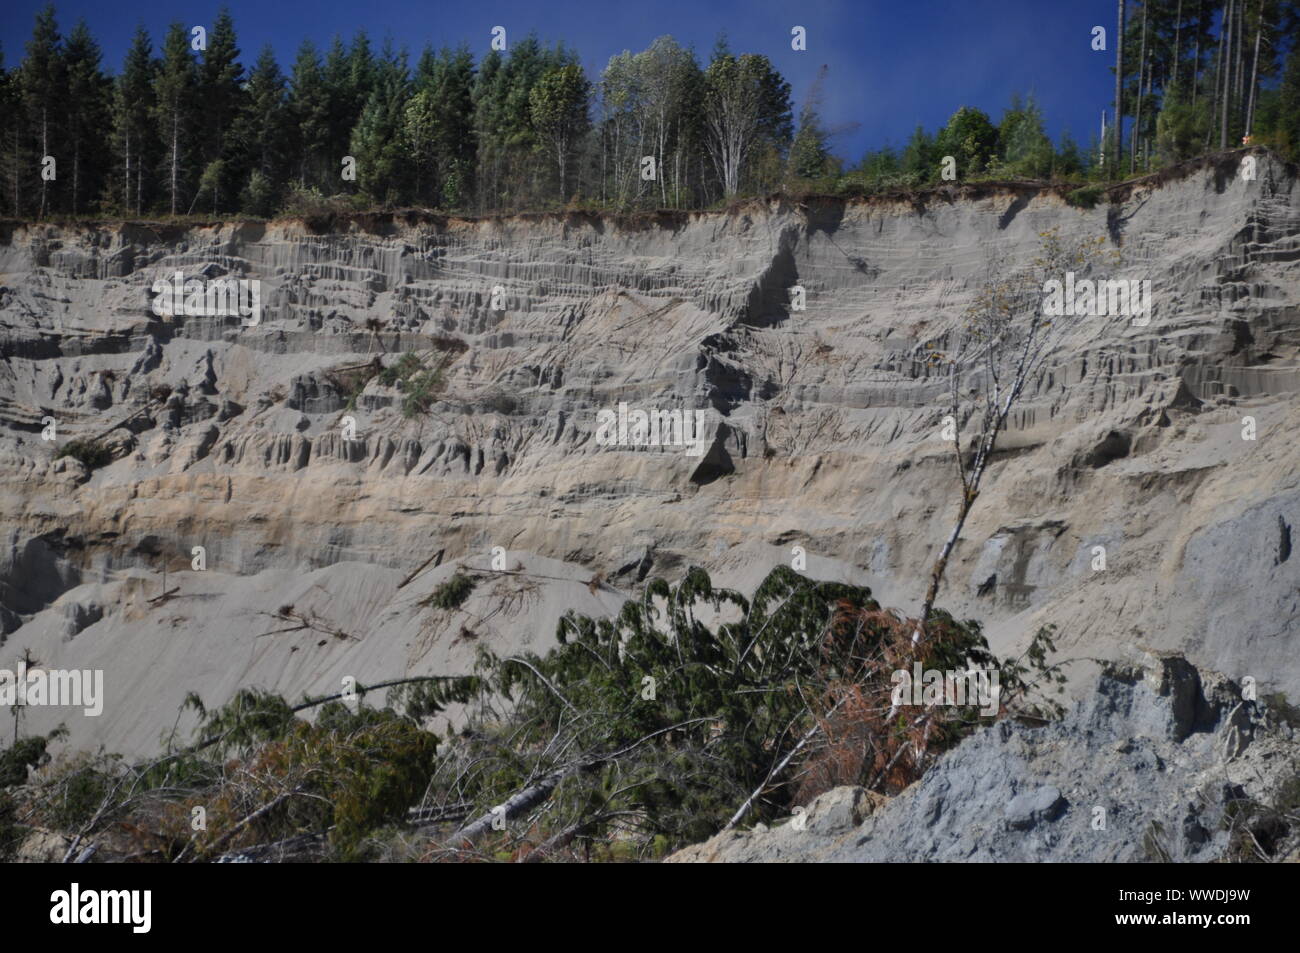 Head Scarp of the deadly 2014 Oso Landslide, North Fork Stillaguamish River Valley, Snohomish County, Washington, USA Stock Photo